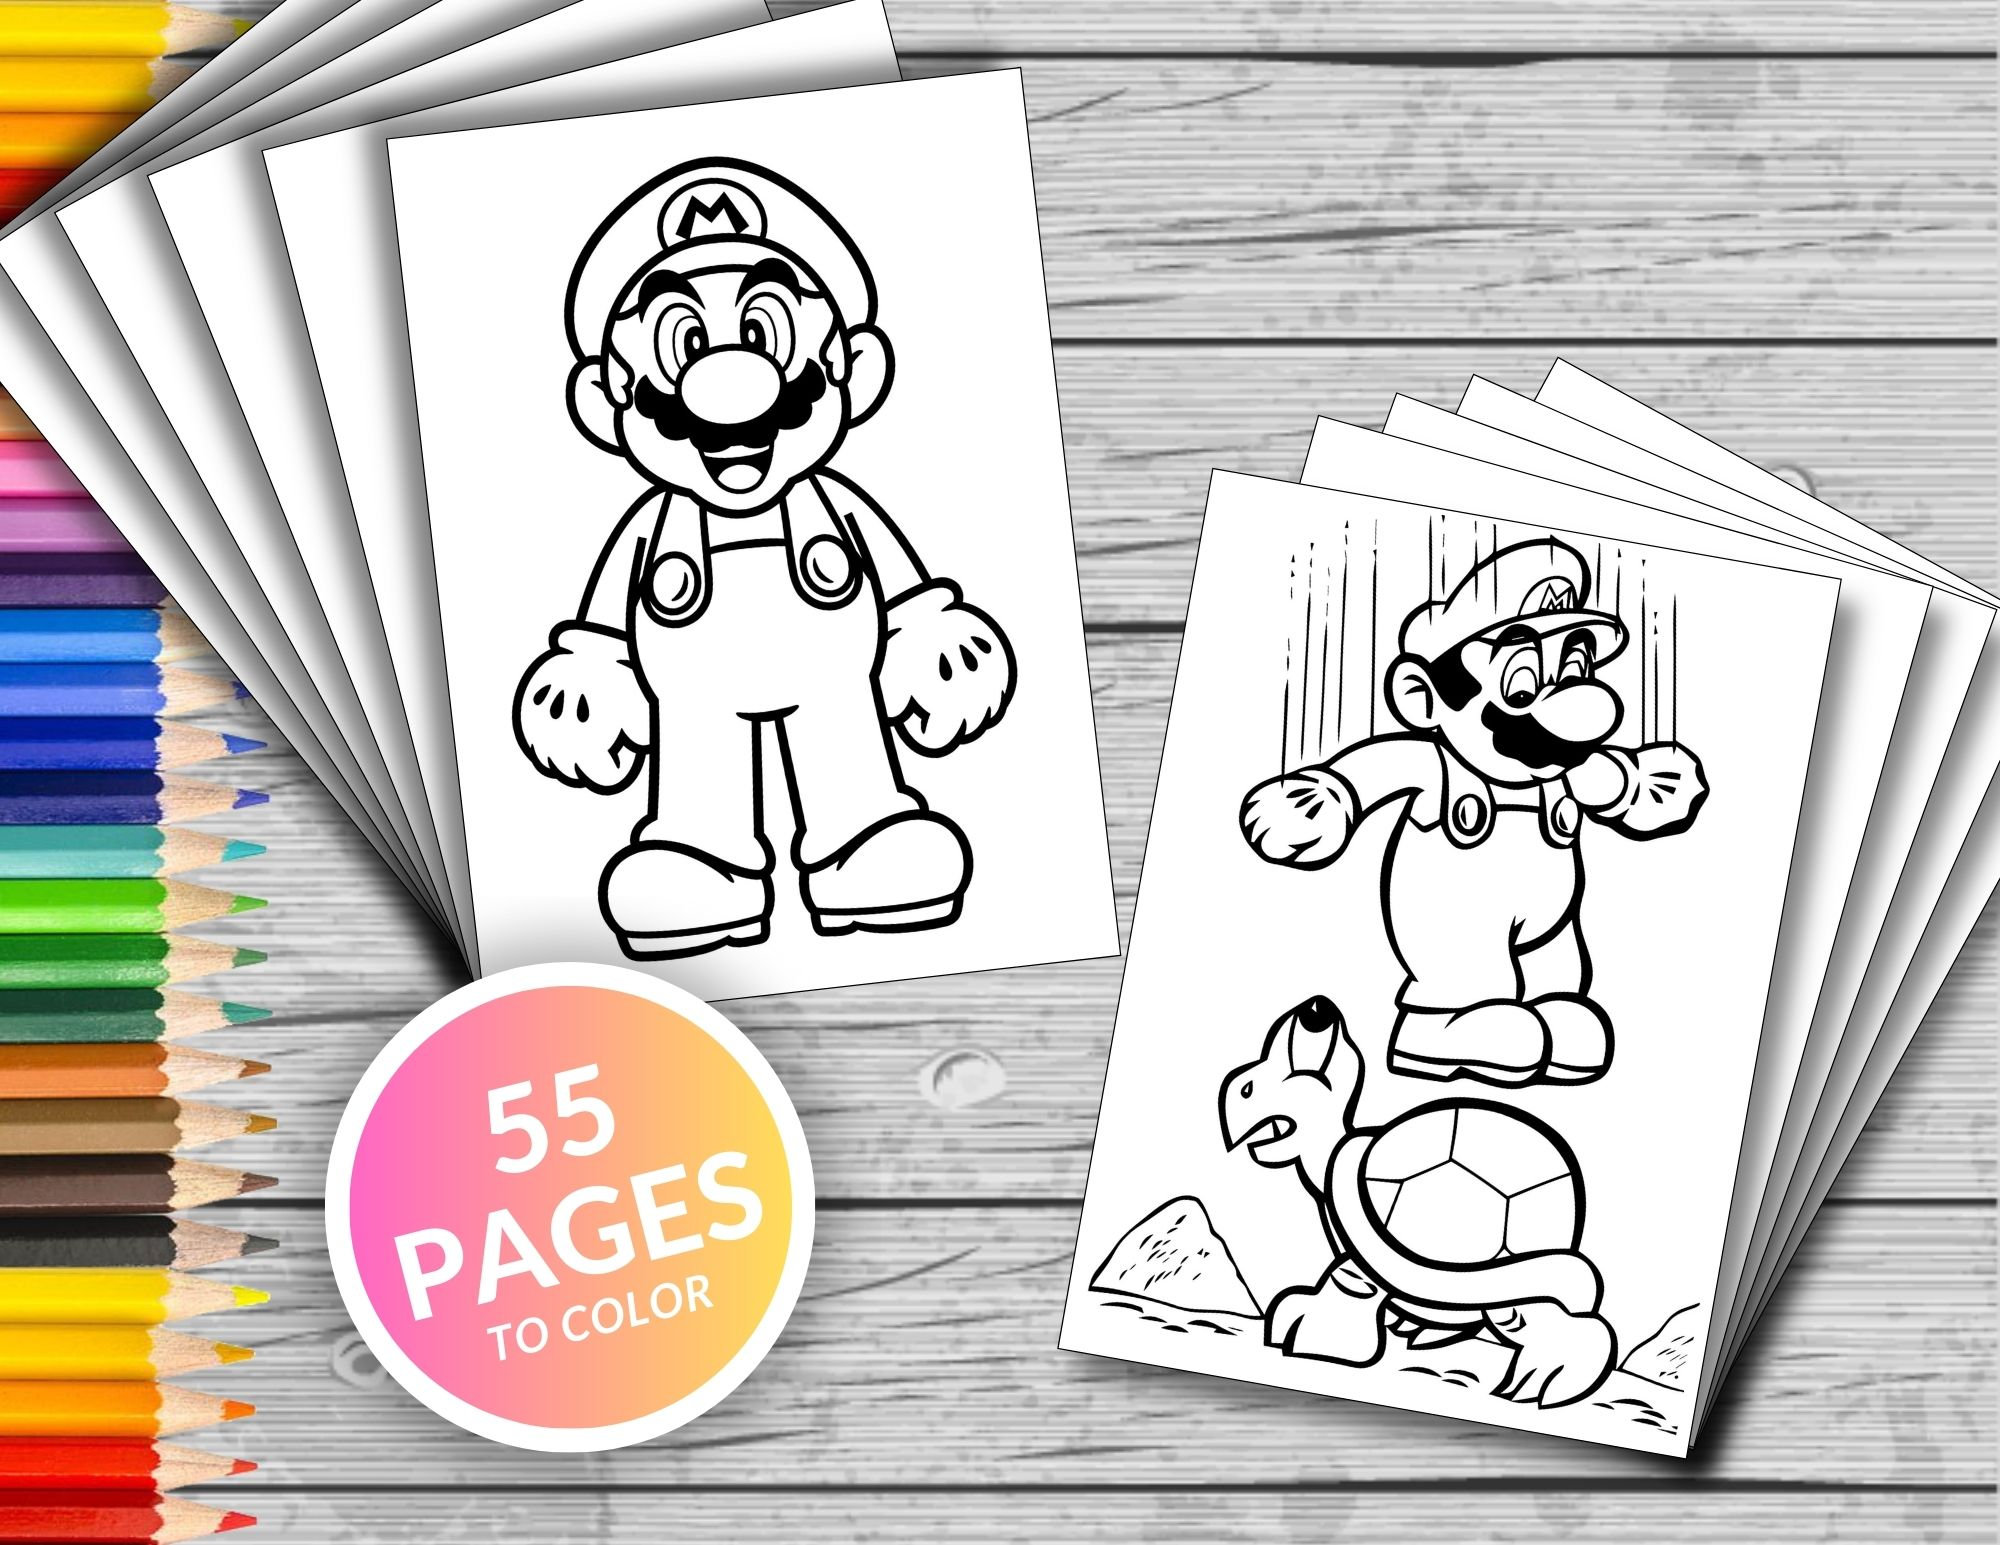 Super mario and friends printable coloring pages super mario coloring book fun at home activity relax and color instant download